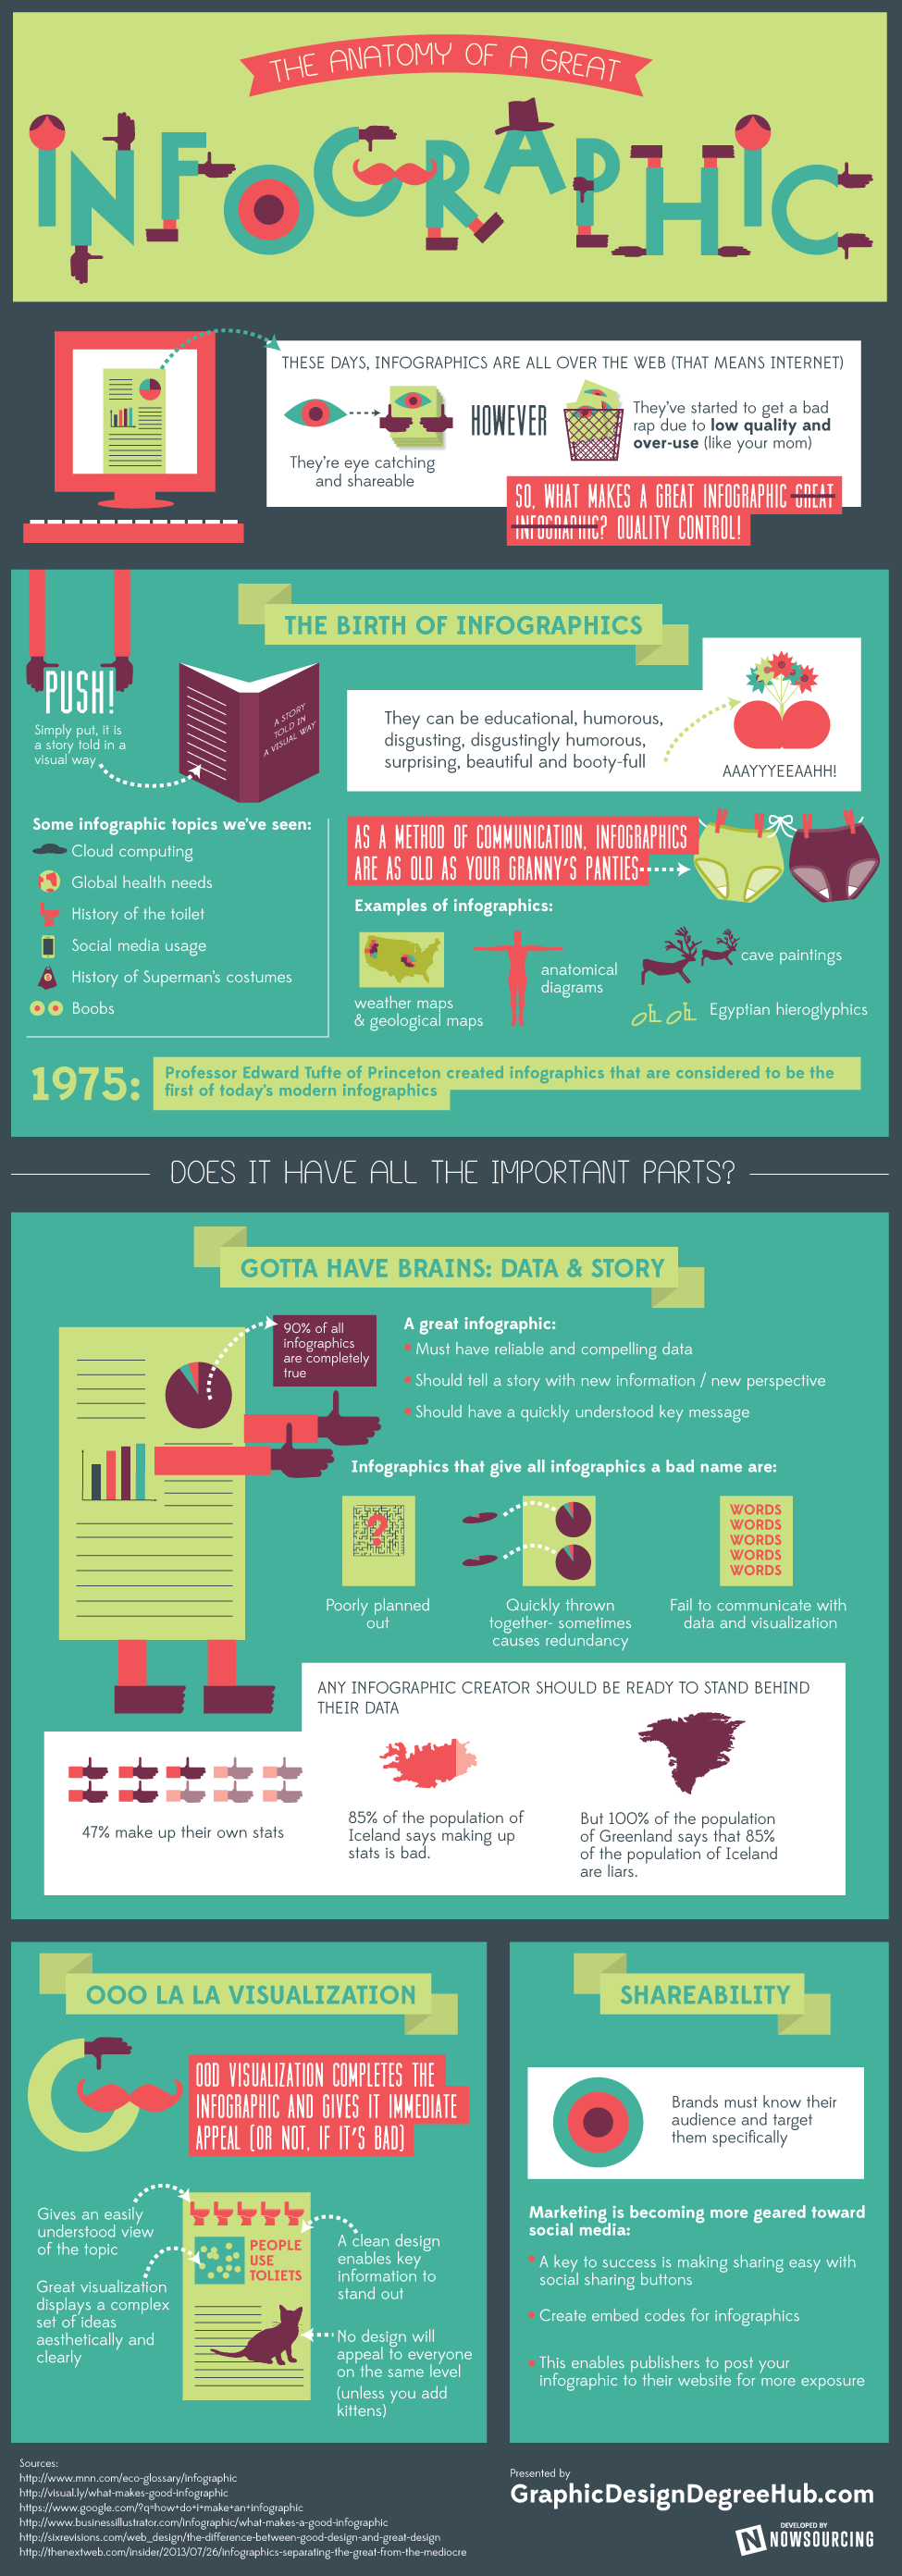 What Makes a Great Infographic